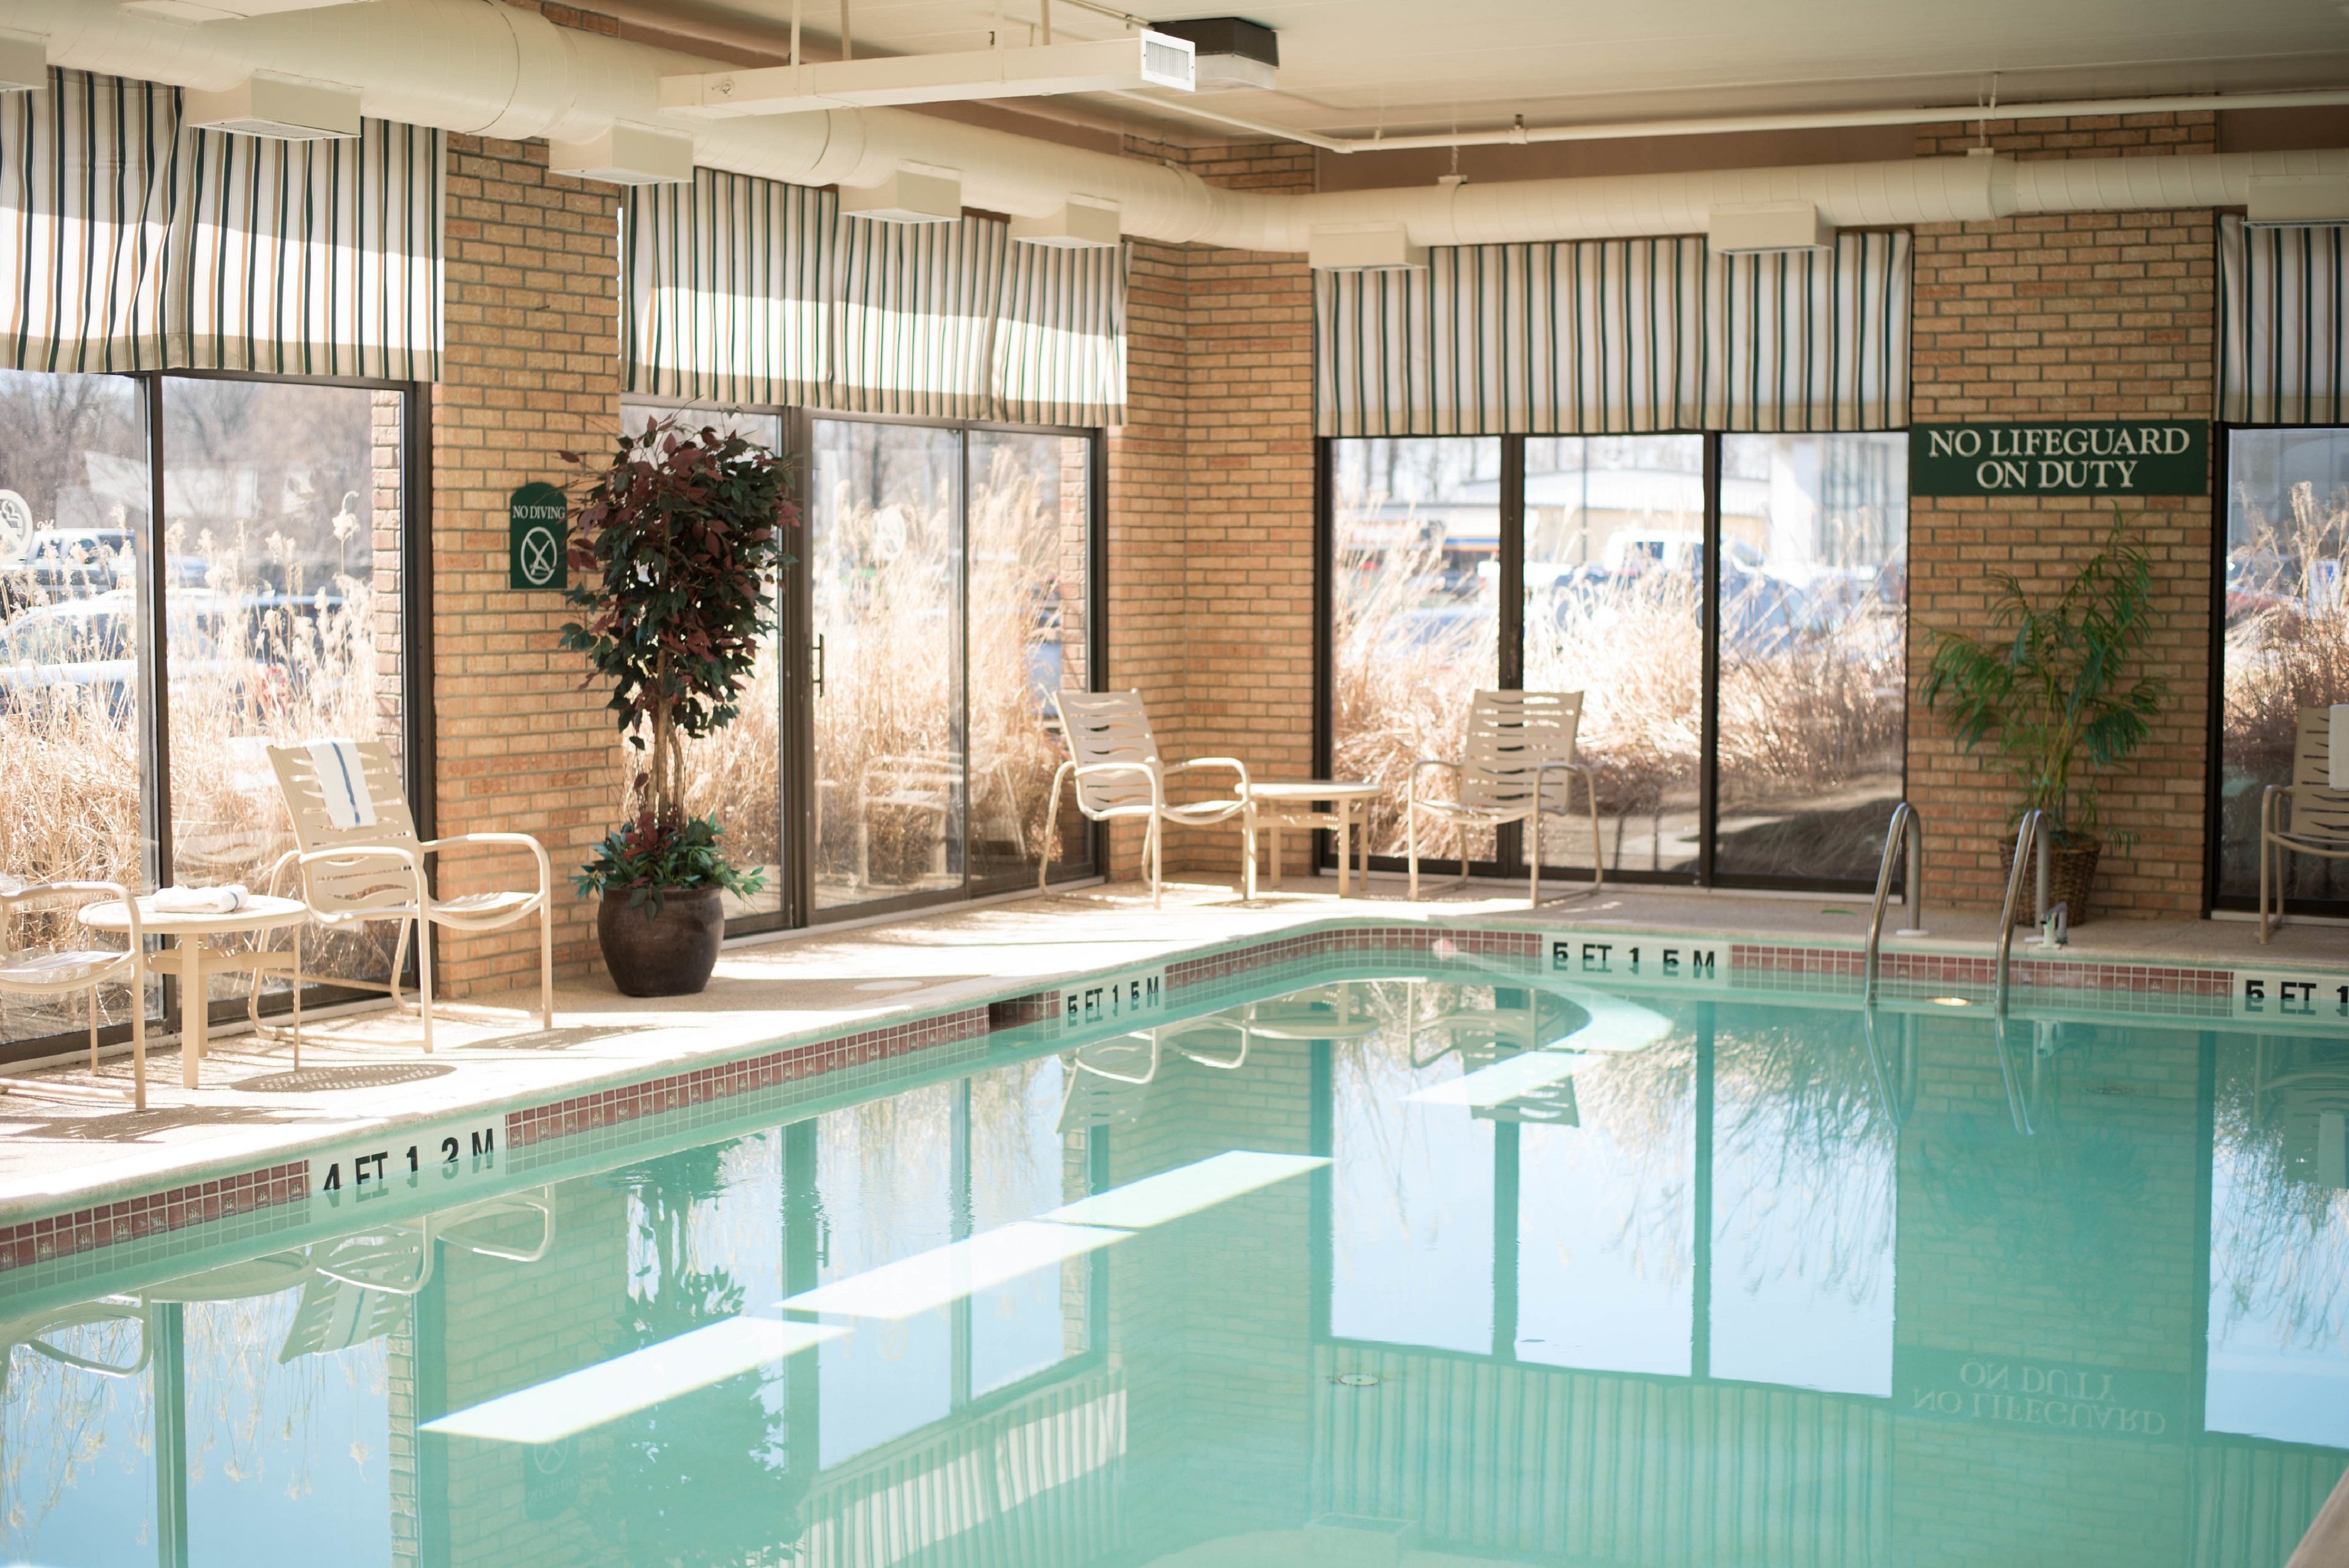 Relax and Renew in our Hotel's Indoor Swimming Pool